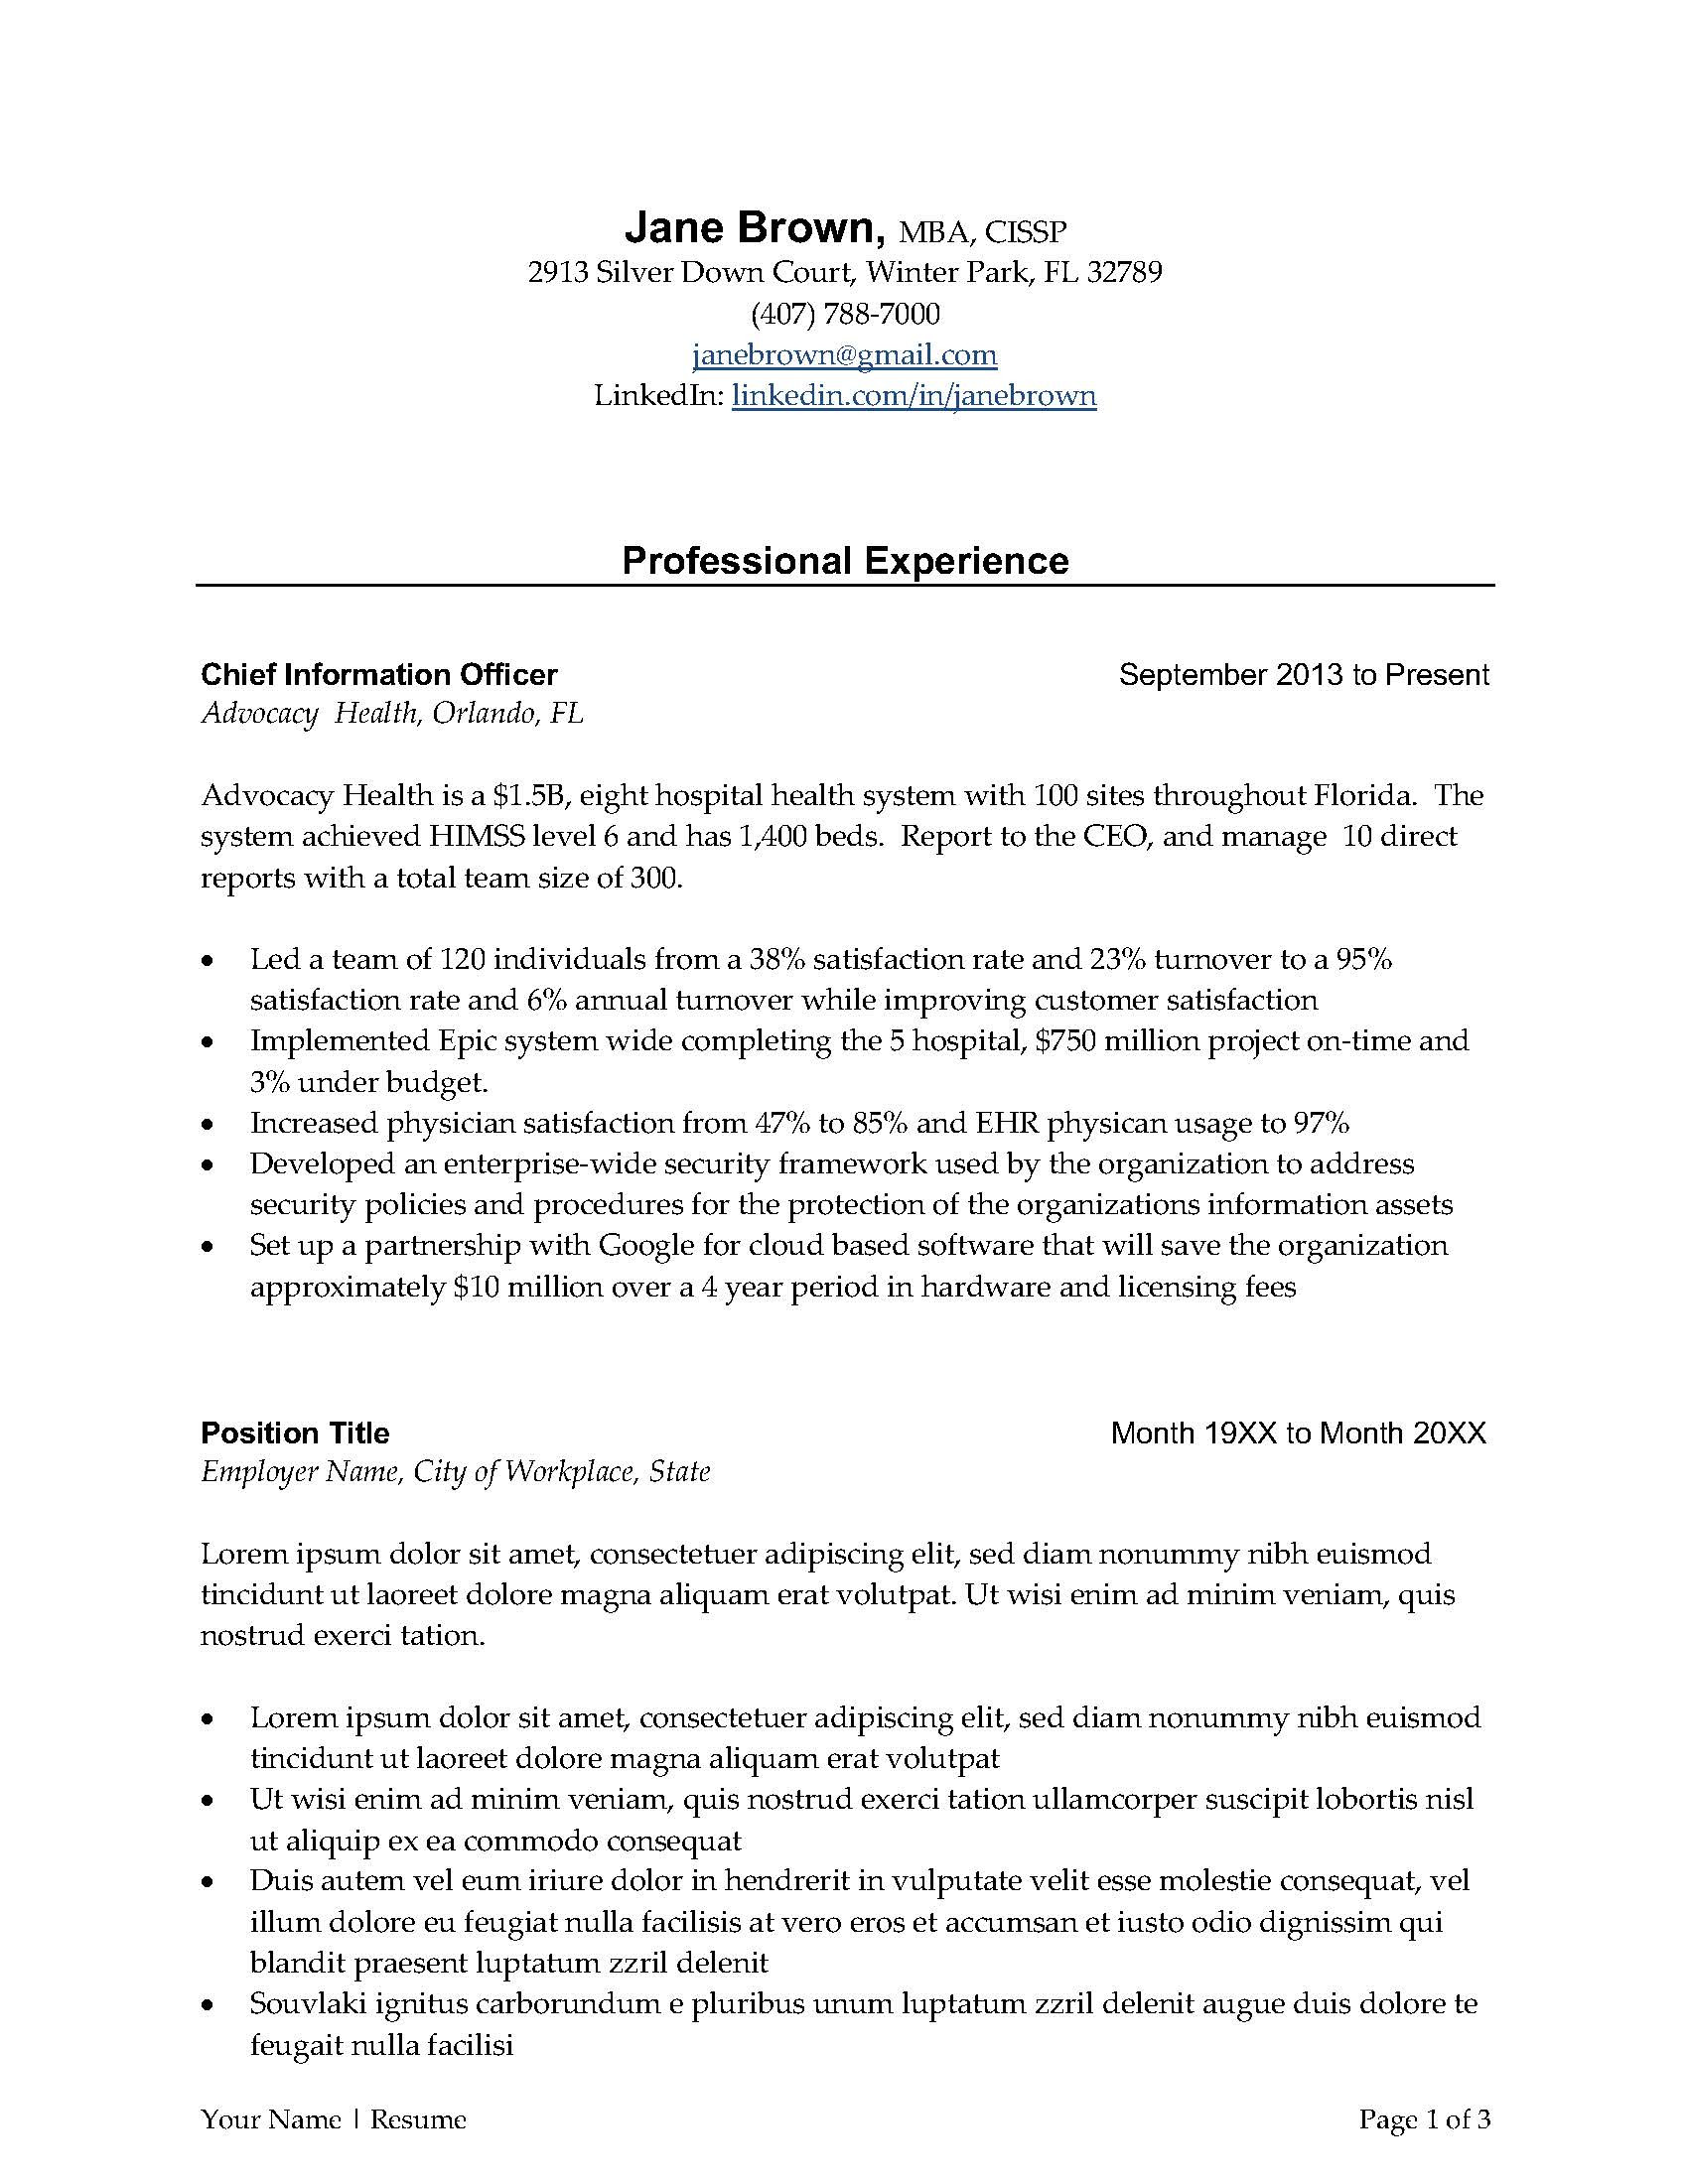 Sample Resume for It Director Position Best Executive Resume Templates for 2021 [free Word Downloads]